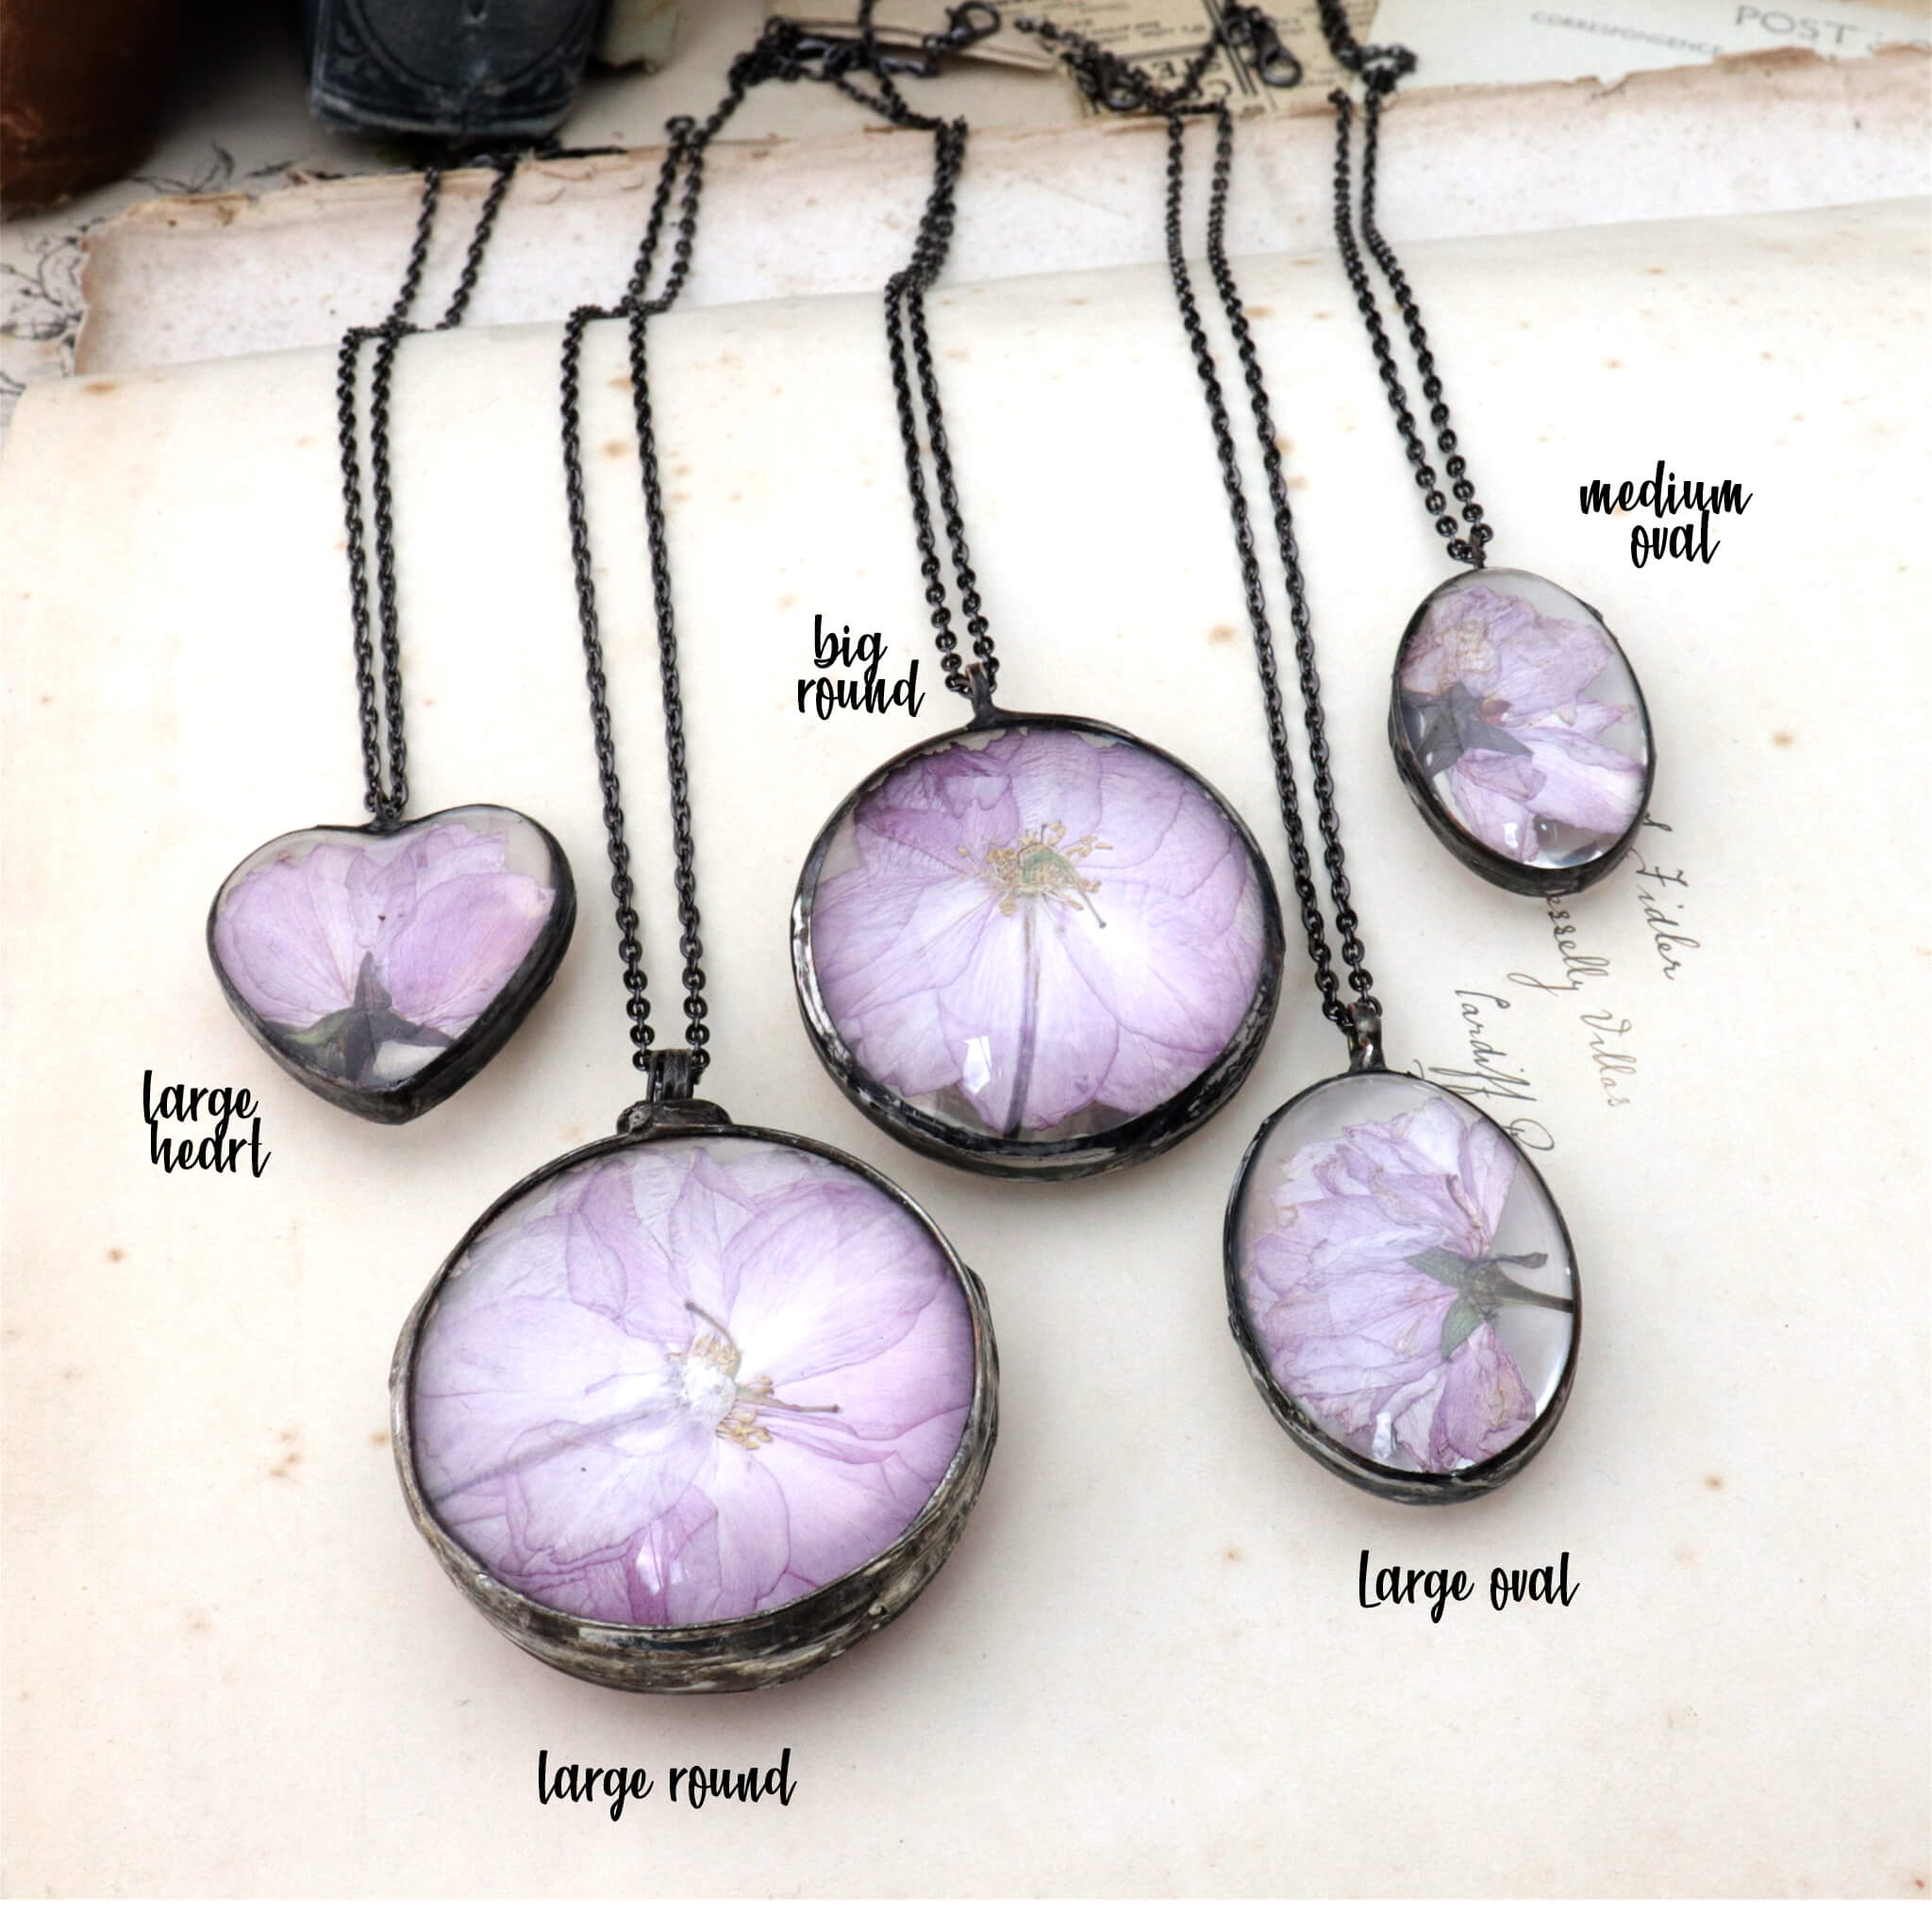 Five cherry blossom necklaces lying side by side on an old book